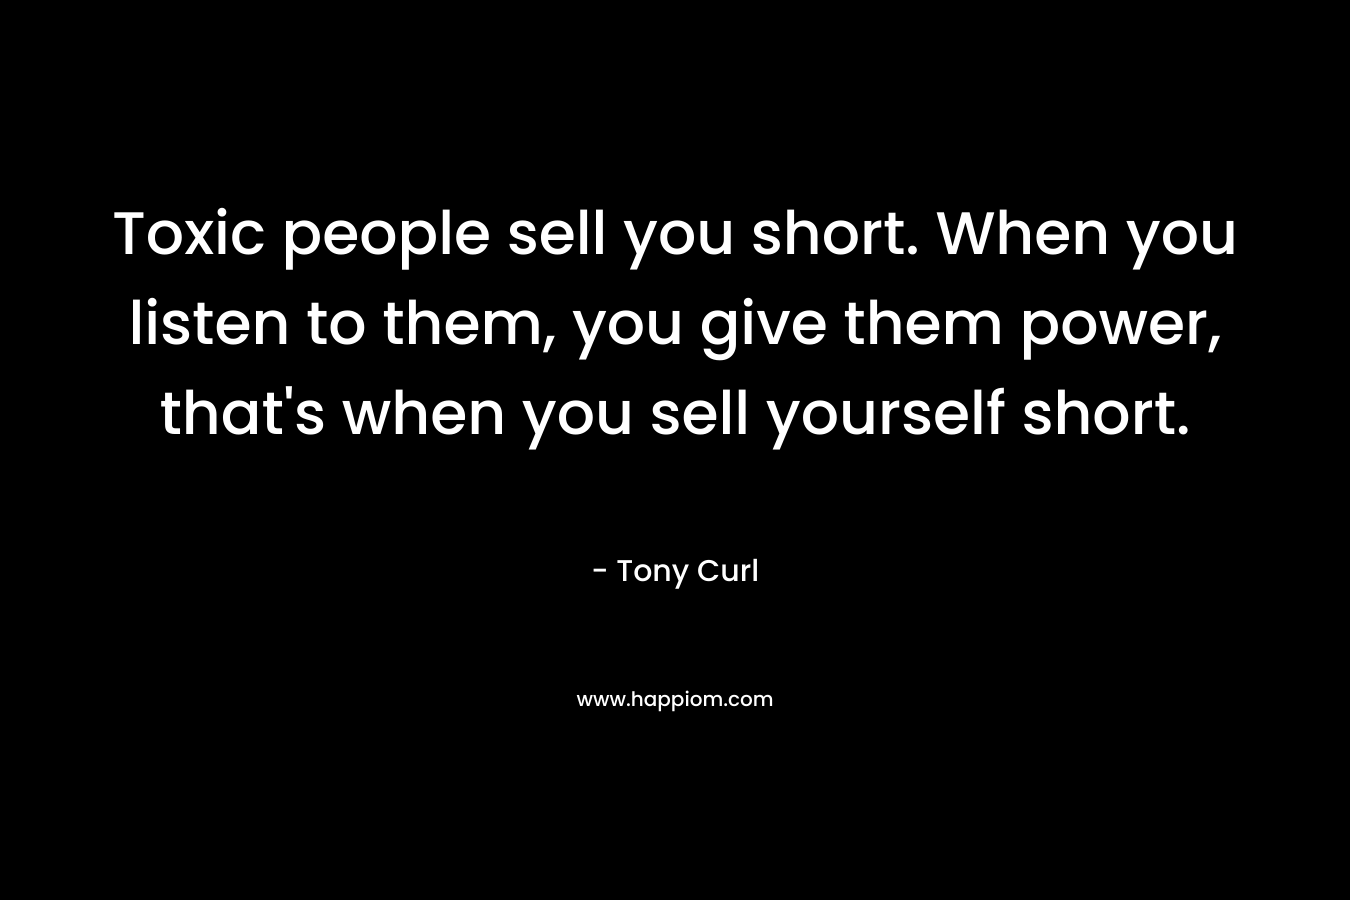 Toxic people sell you short. When you listen to them, you give them power, that's when you sell yourself short.